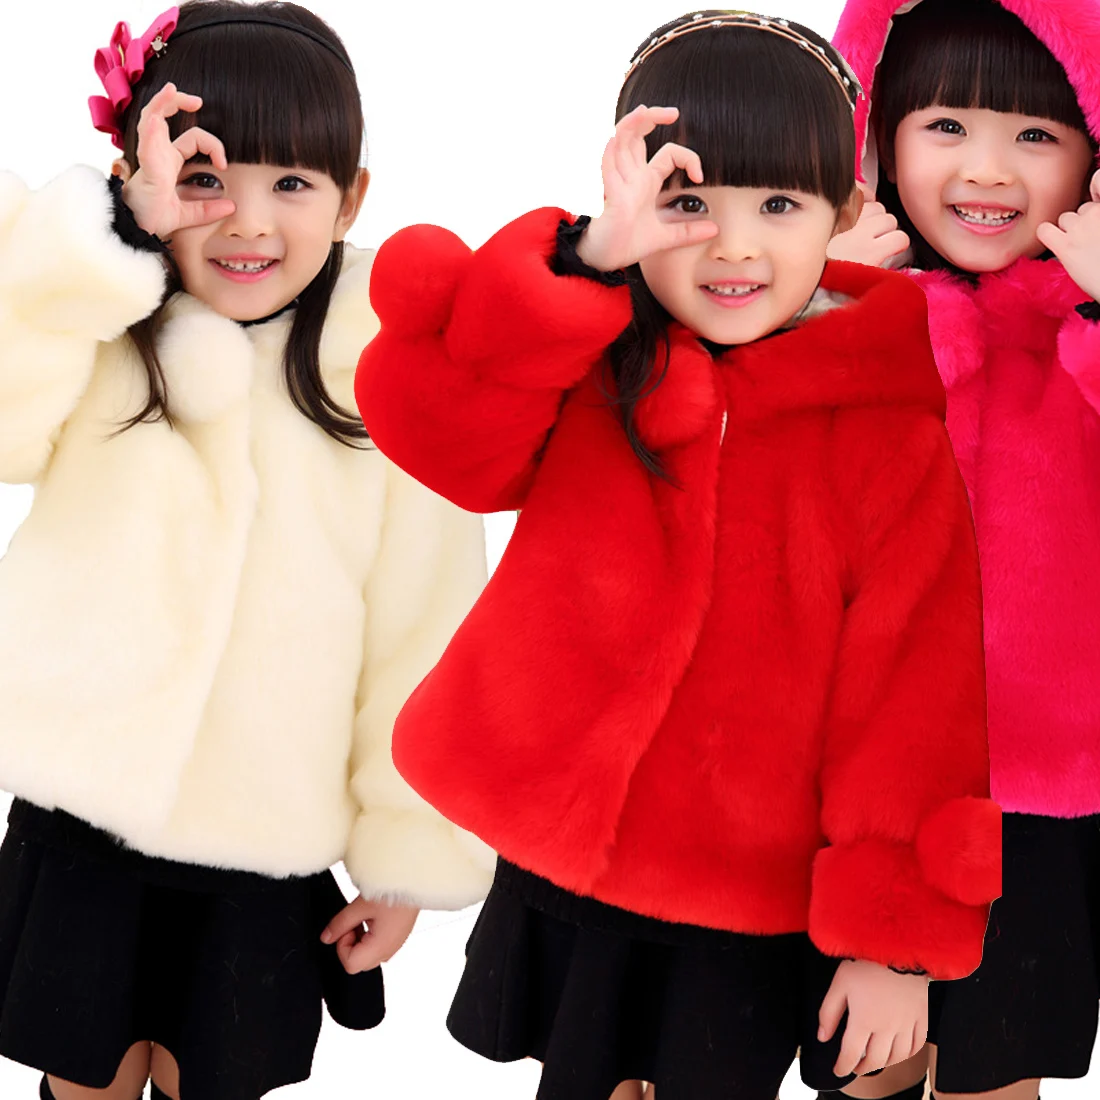 

Children Girls Winter Coats New Fashion Brand Thick Fake Fur Warm Baby Jacket Solid Casual Hooded Kids Clothes Outwears